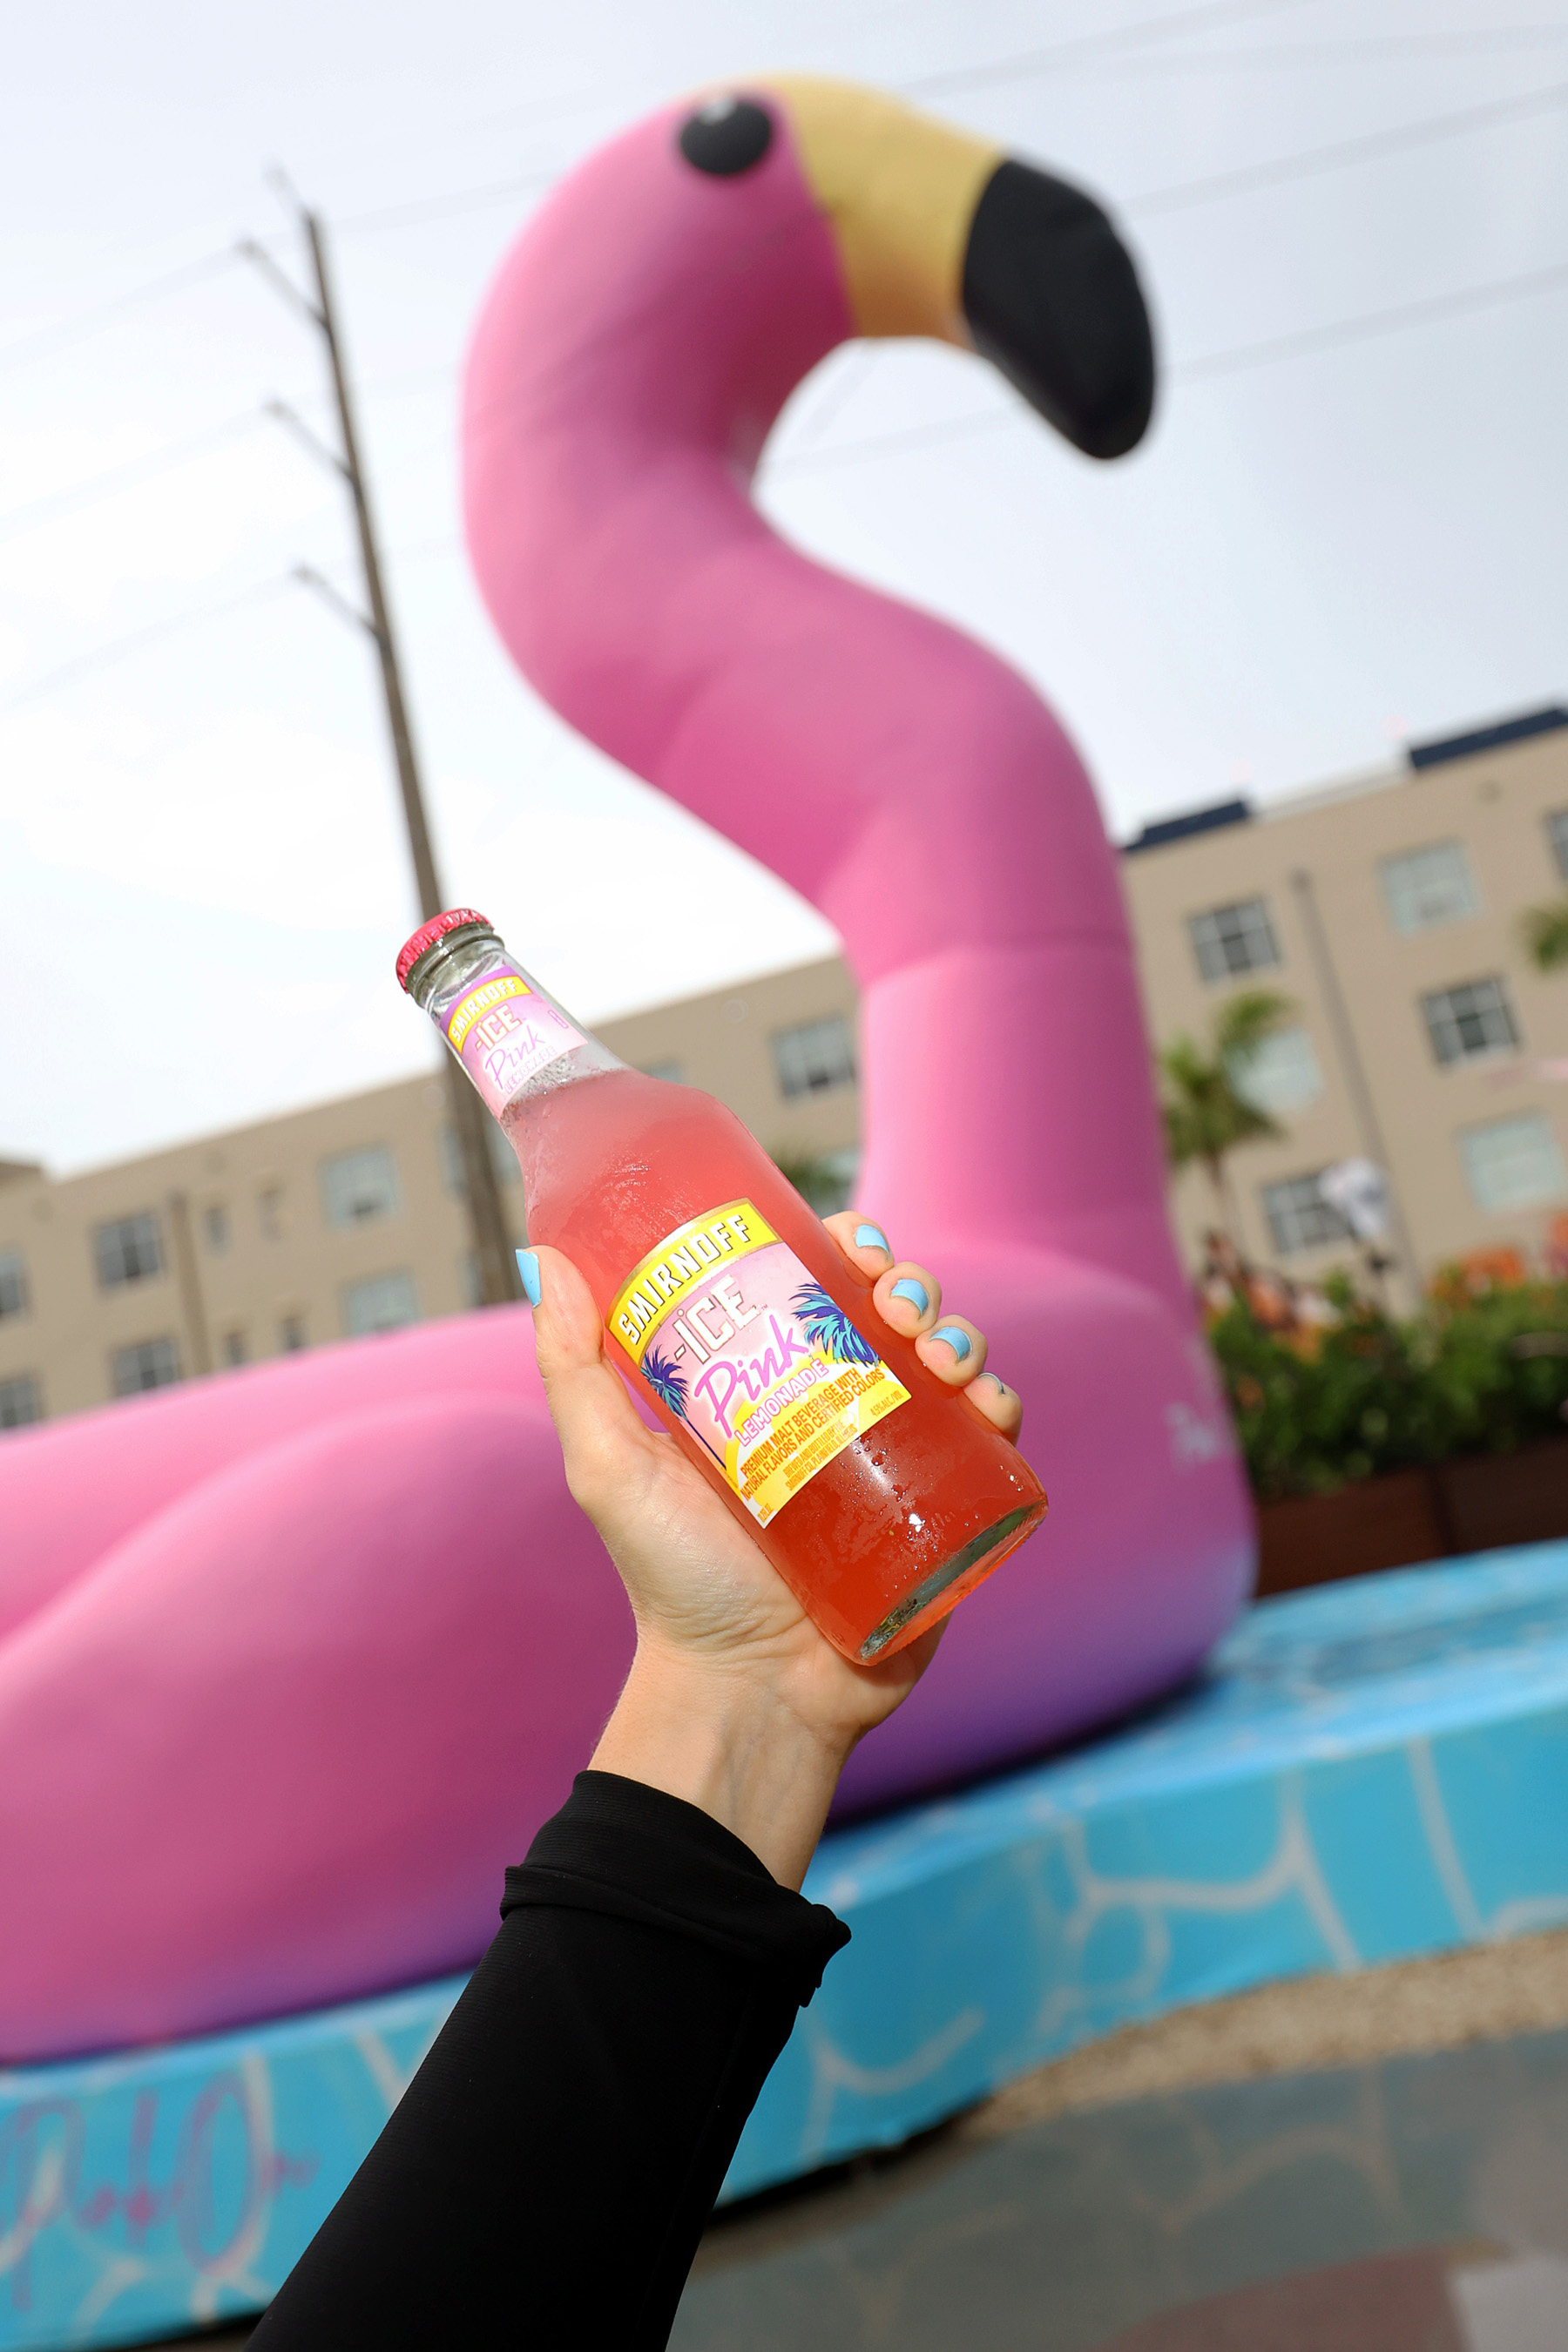 Smirnoff Paints Miami Pink With The Help Of Music Superstar Ty Dolla $ign, A Larger-Than-Life Pink Flamingo And Pop-Up Neon Lemonade Stand Serving Its Newest Pink Lemonade Offering